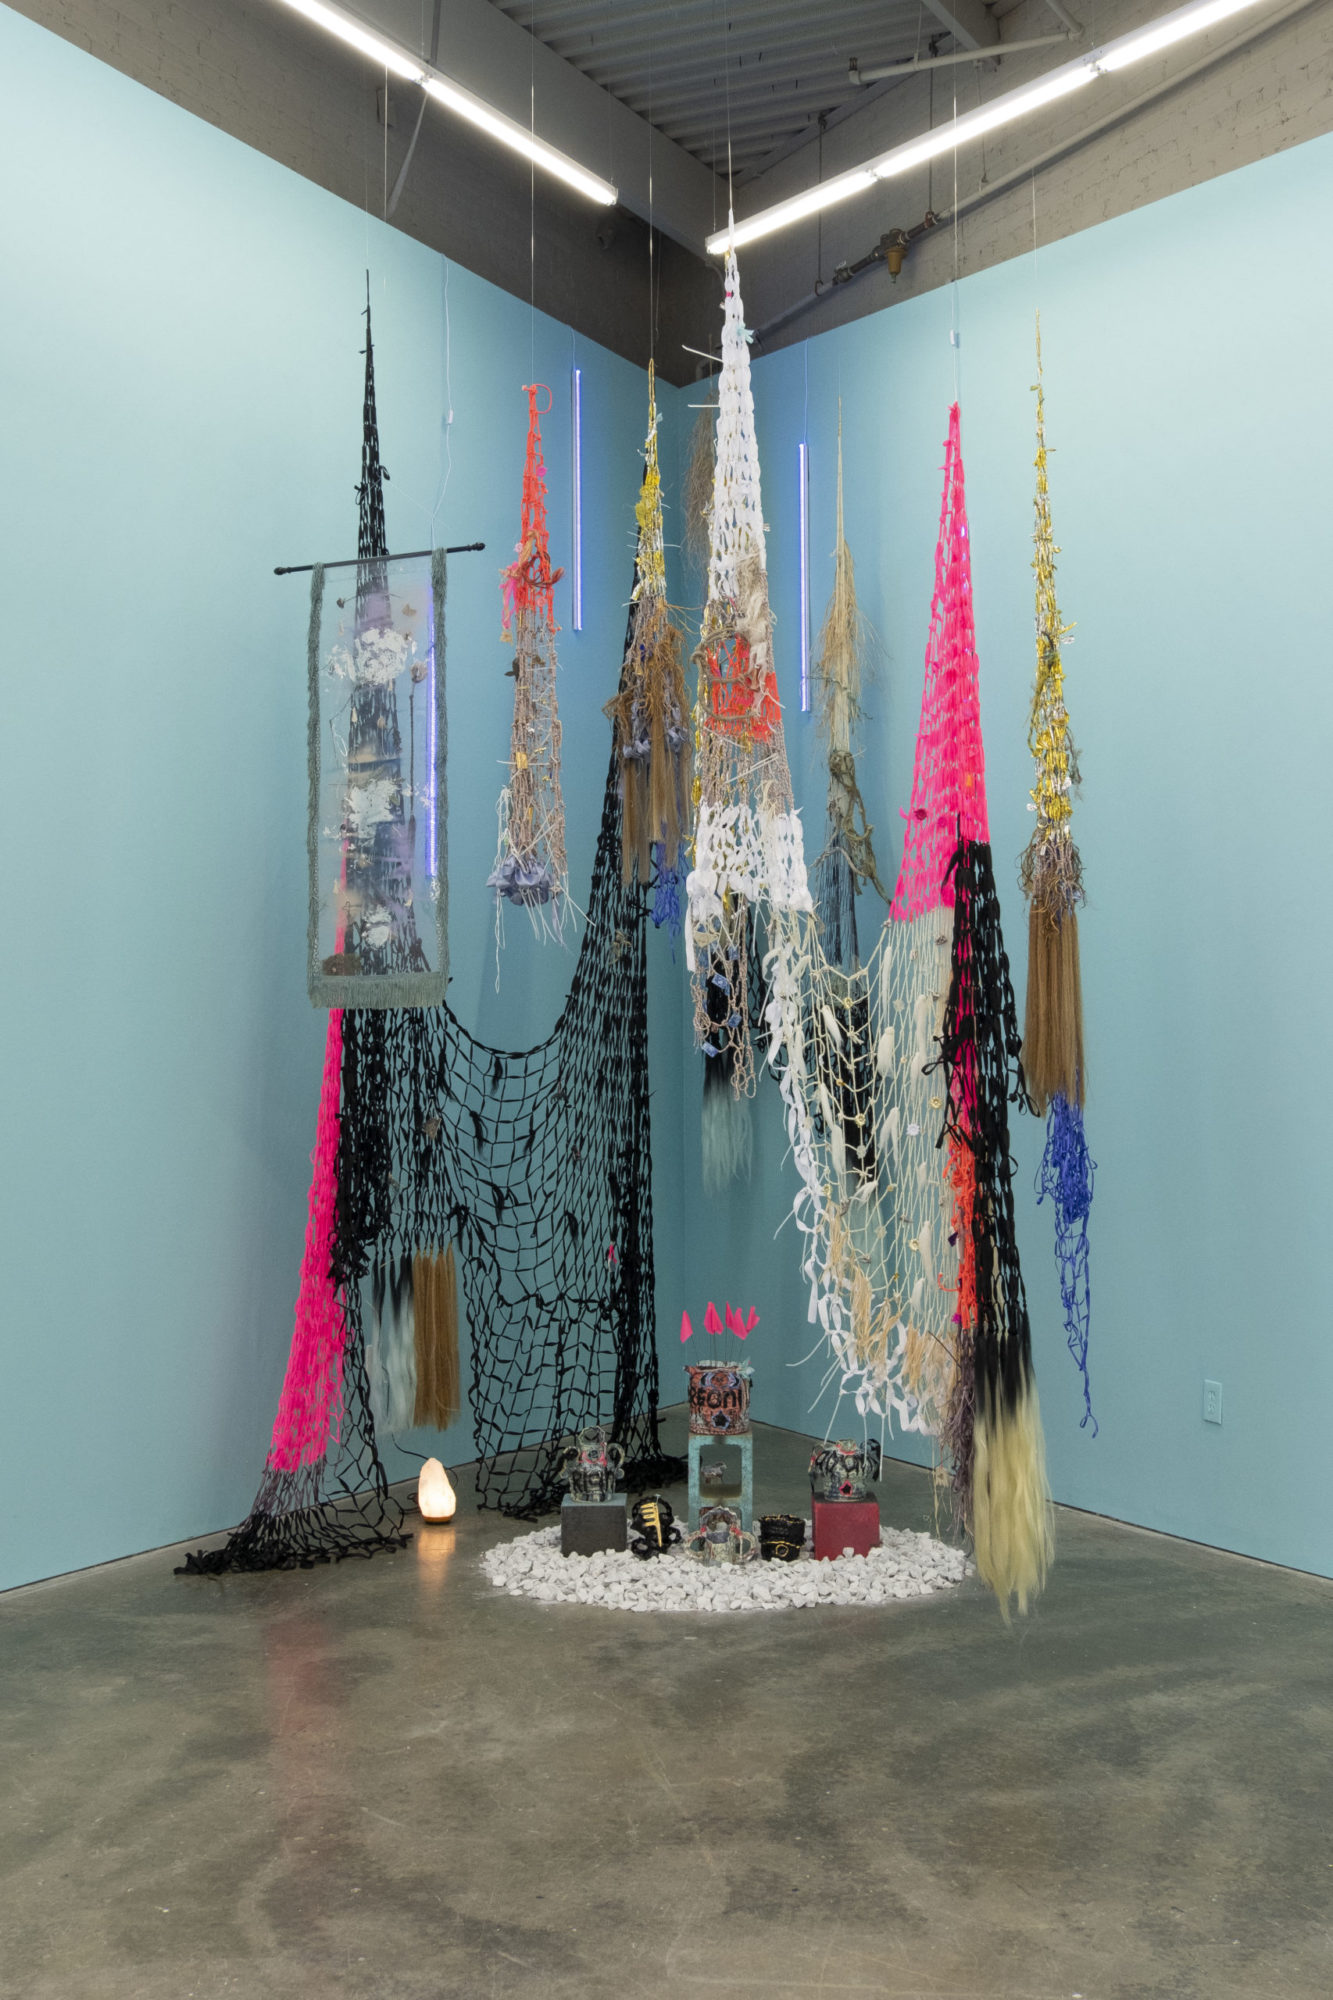 A mixed media sculpture, composed primarily of colorful textiles, is positioned in the corner of the gallery space.